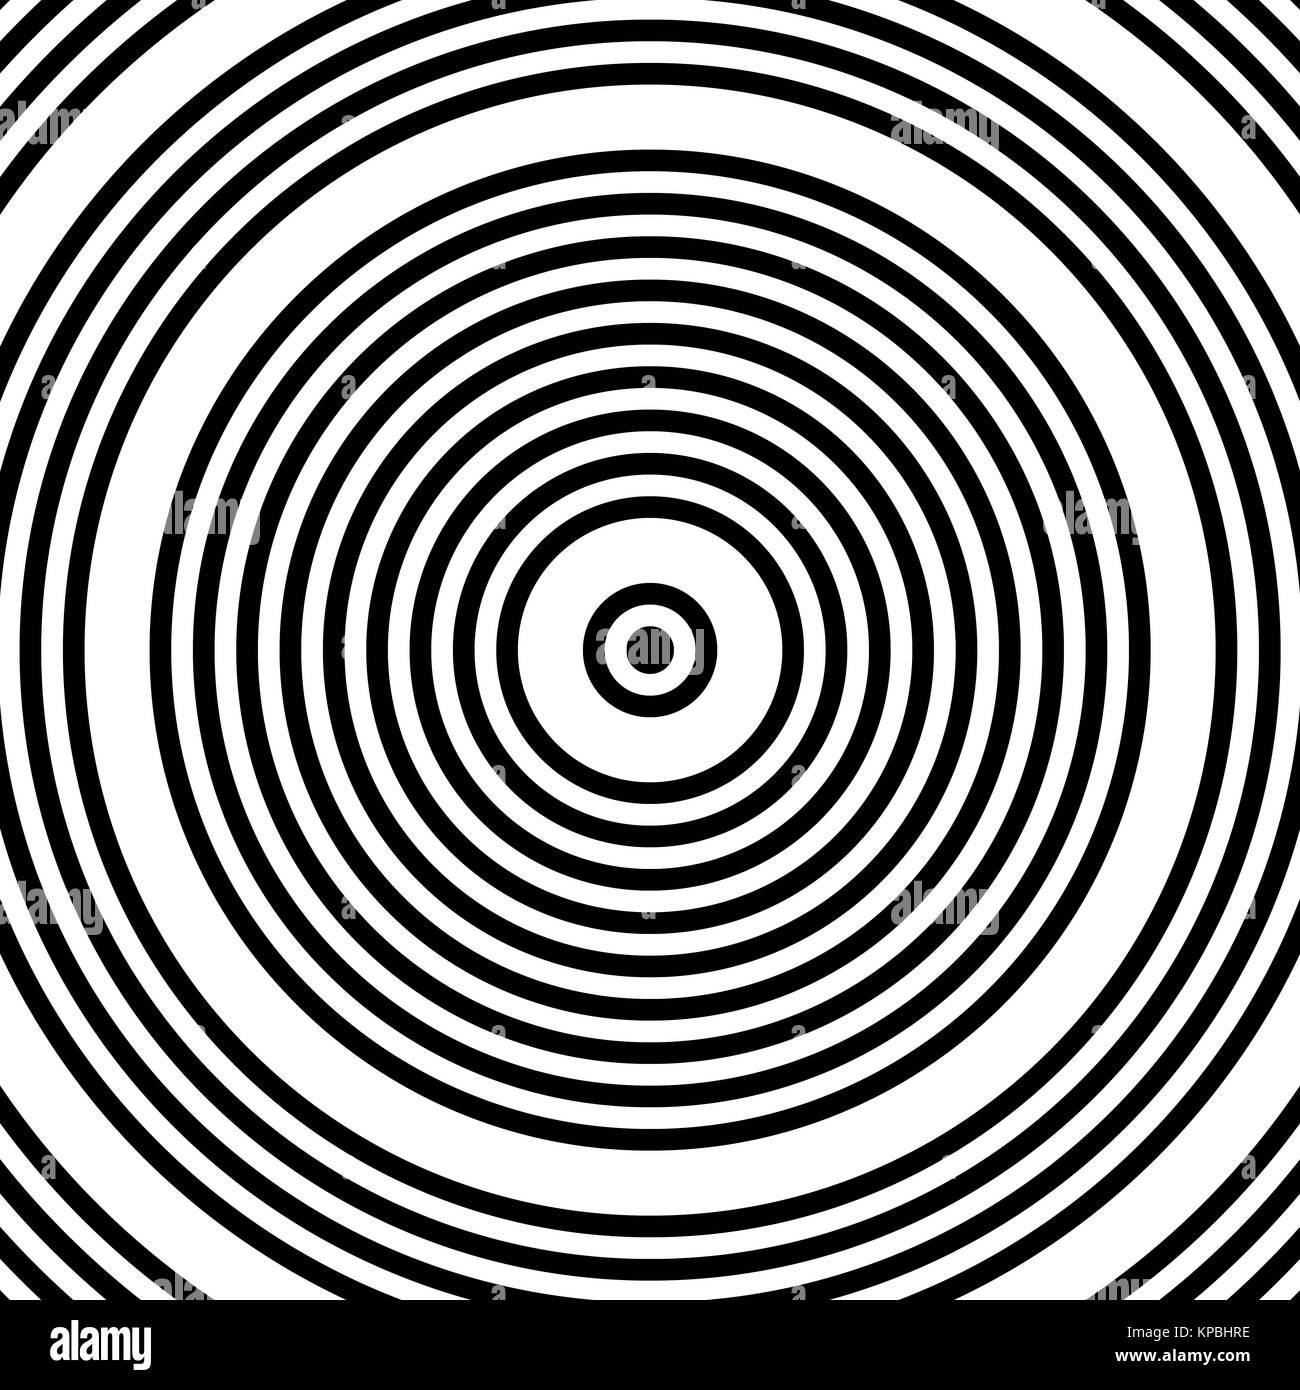 Black and White Abstract Modern Concentric Circles Stock Photo